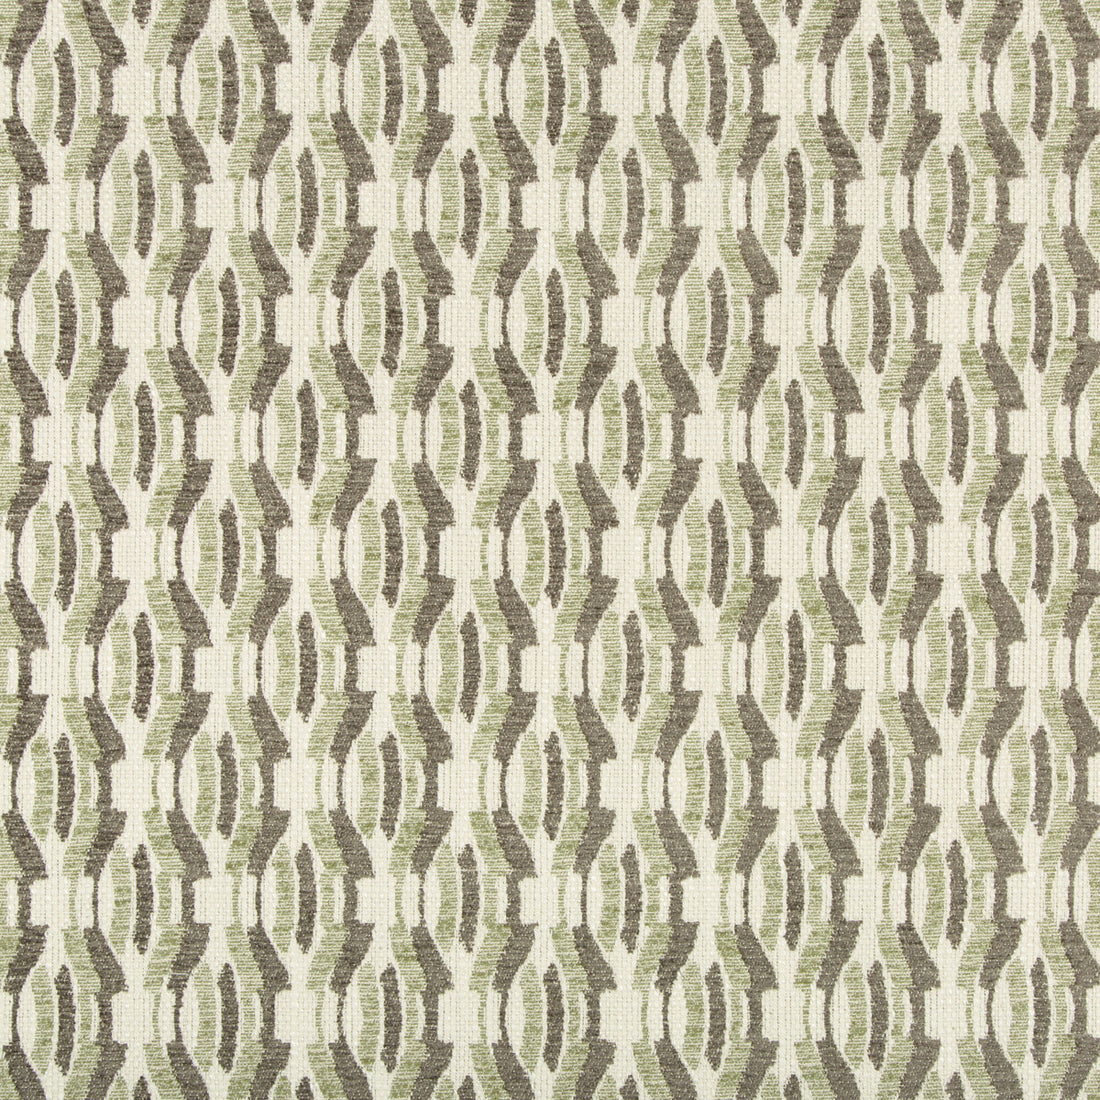 Agate Weave fabric in sage color - pattern GWF-3748.308.0 - by Lee Jofa Modern in the Gems collection